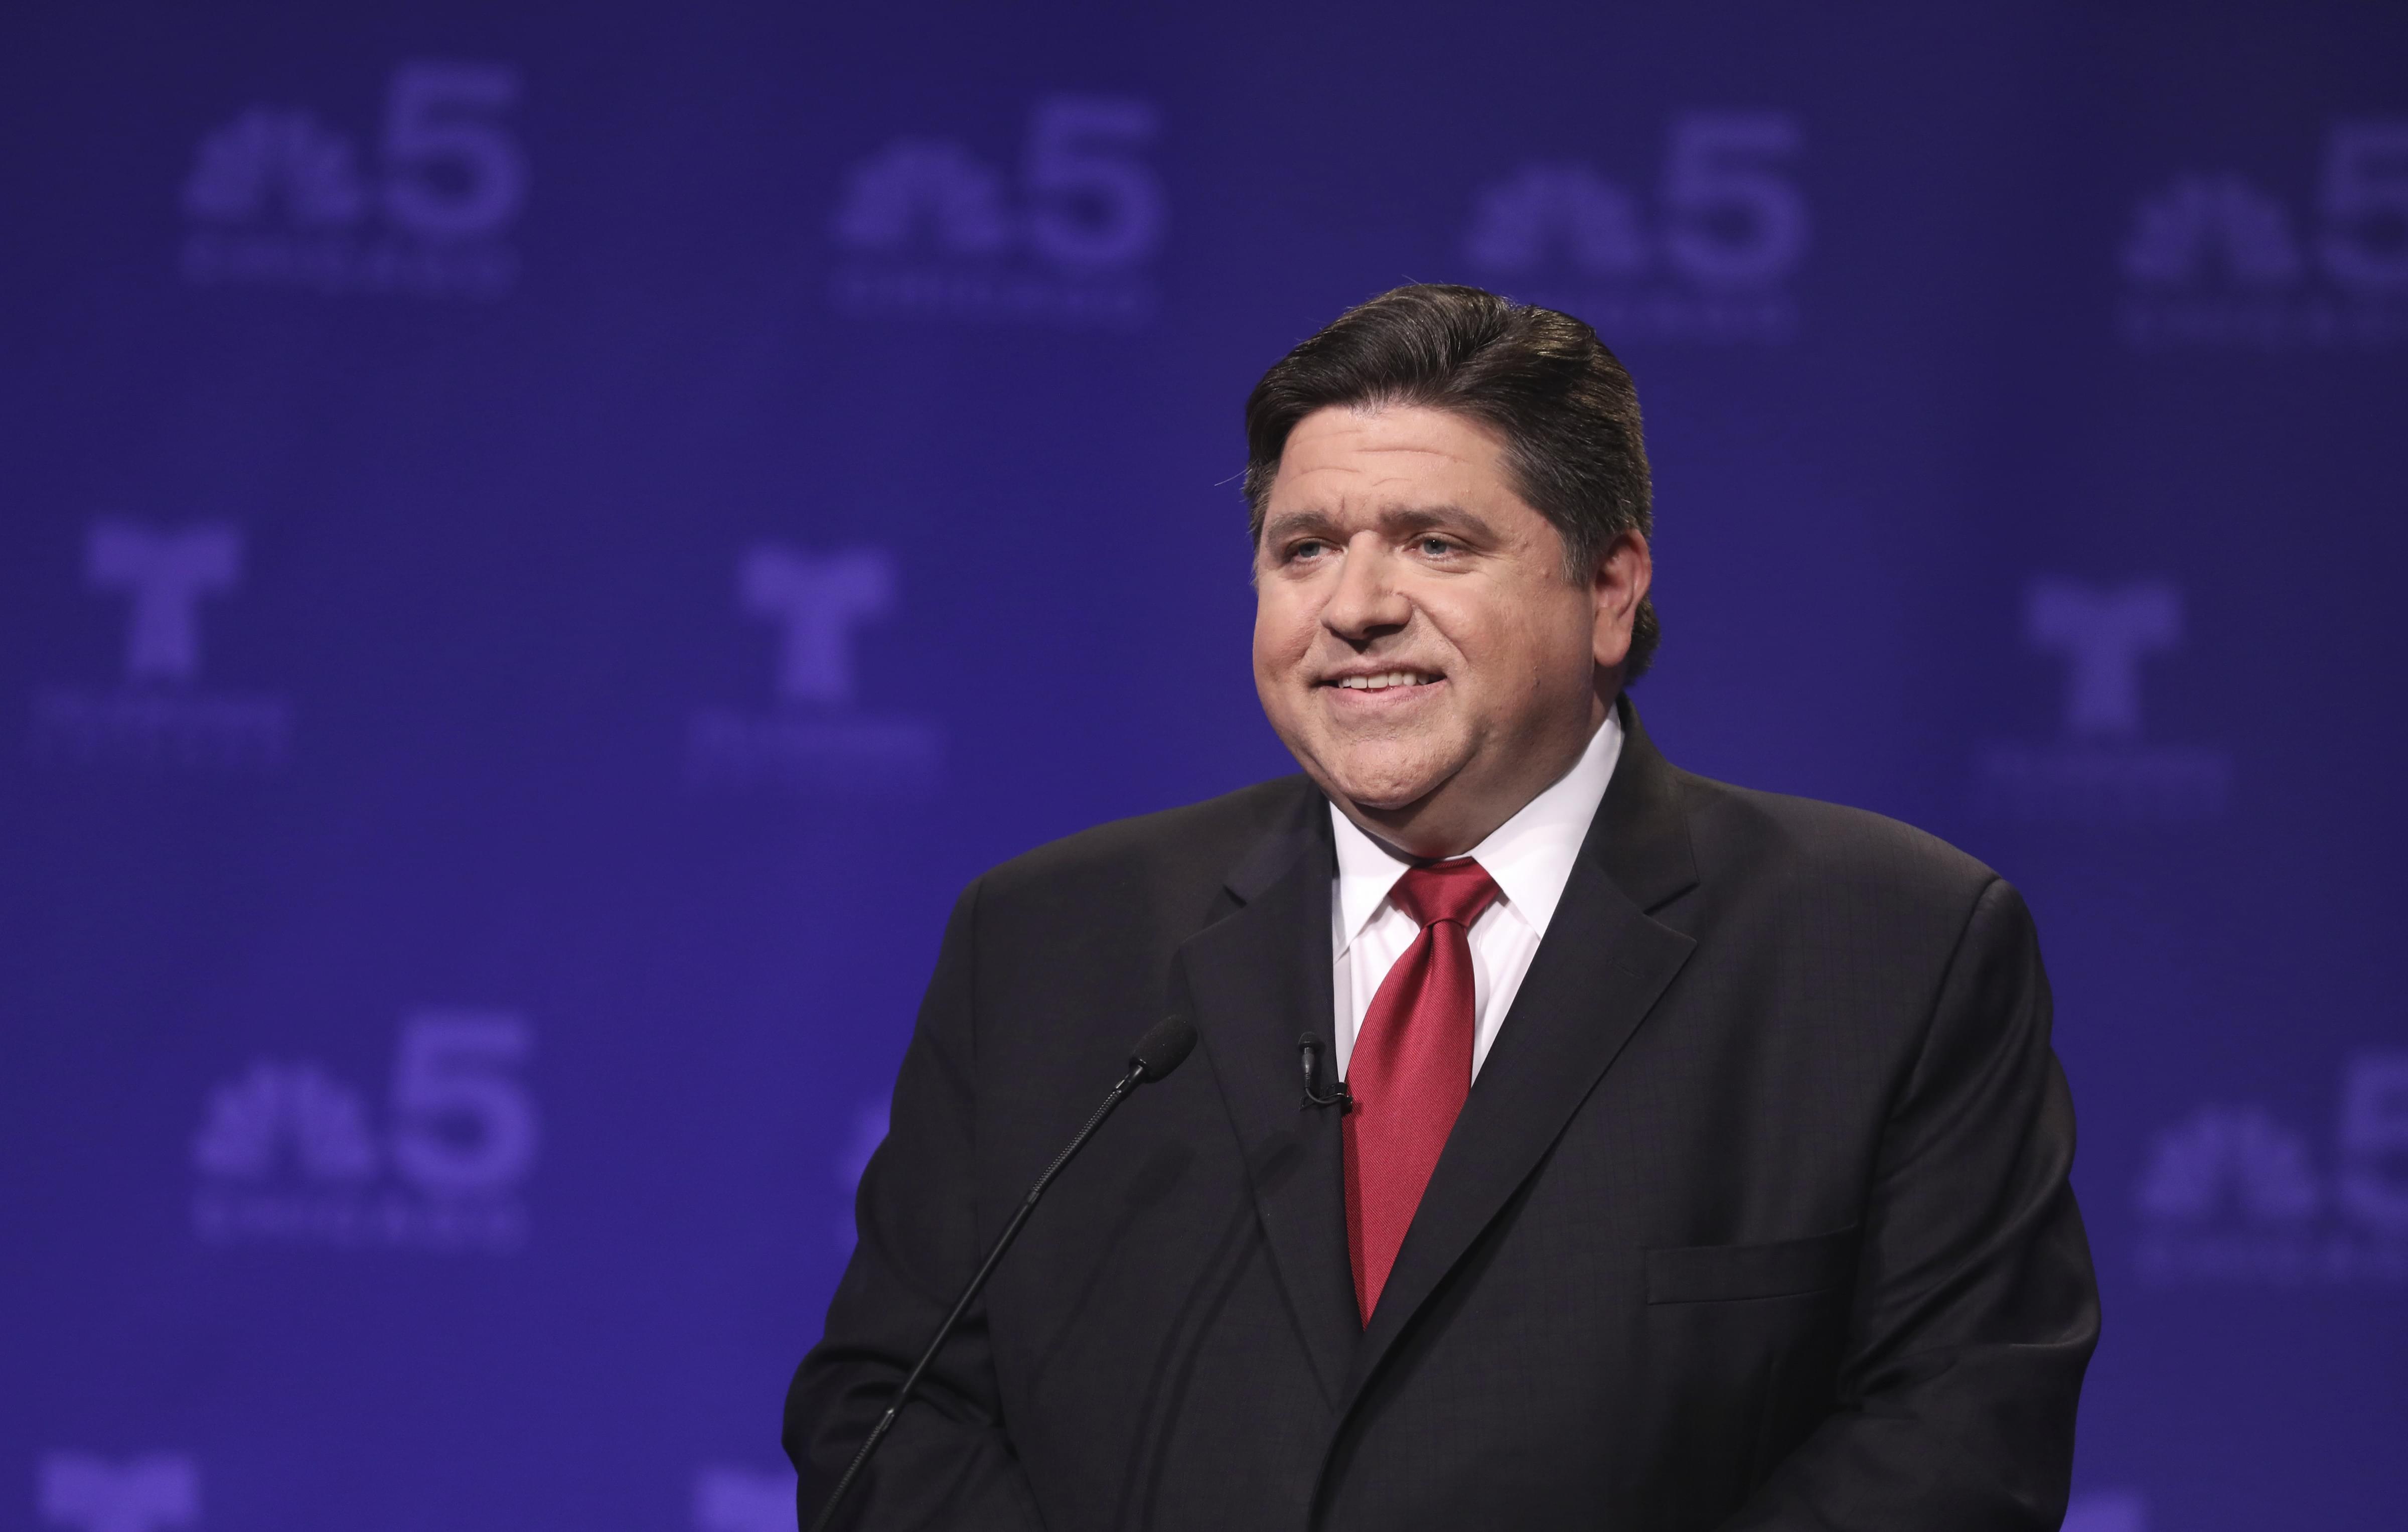 Democratic candidate for Illinois governor J.B. Pritzker takes his podium position before a televised forum Tuesday, Jan. 23, 2018, in Chicago. Pritzker won the Democratic primary for governor. 